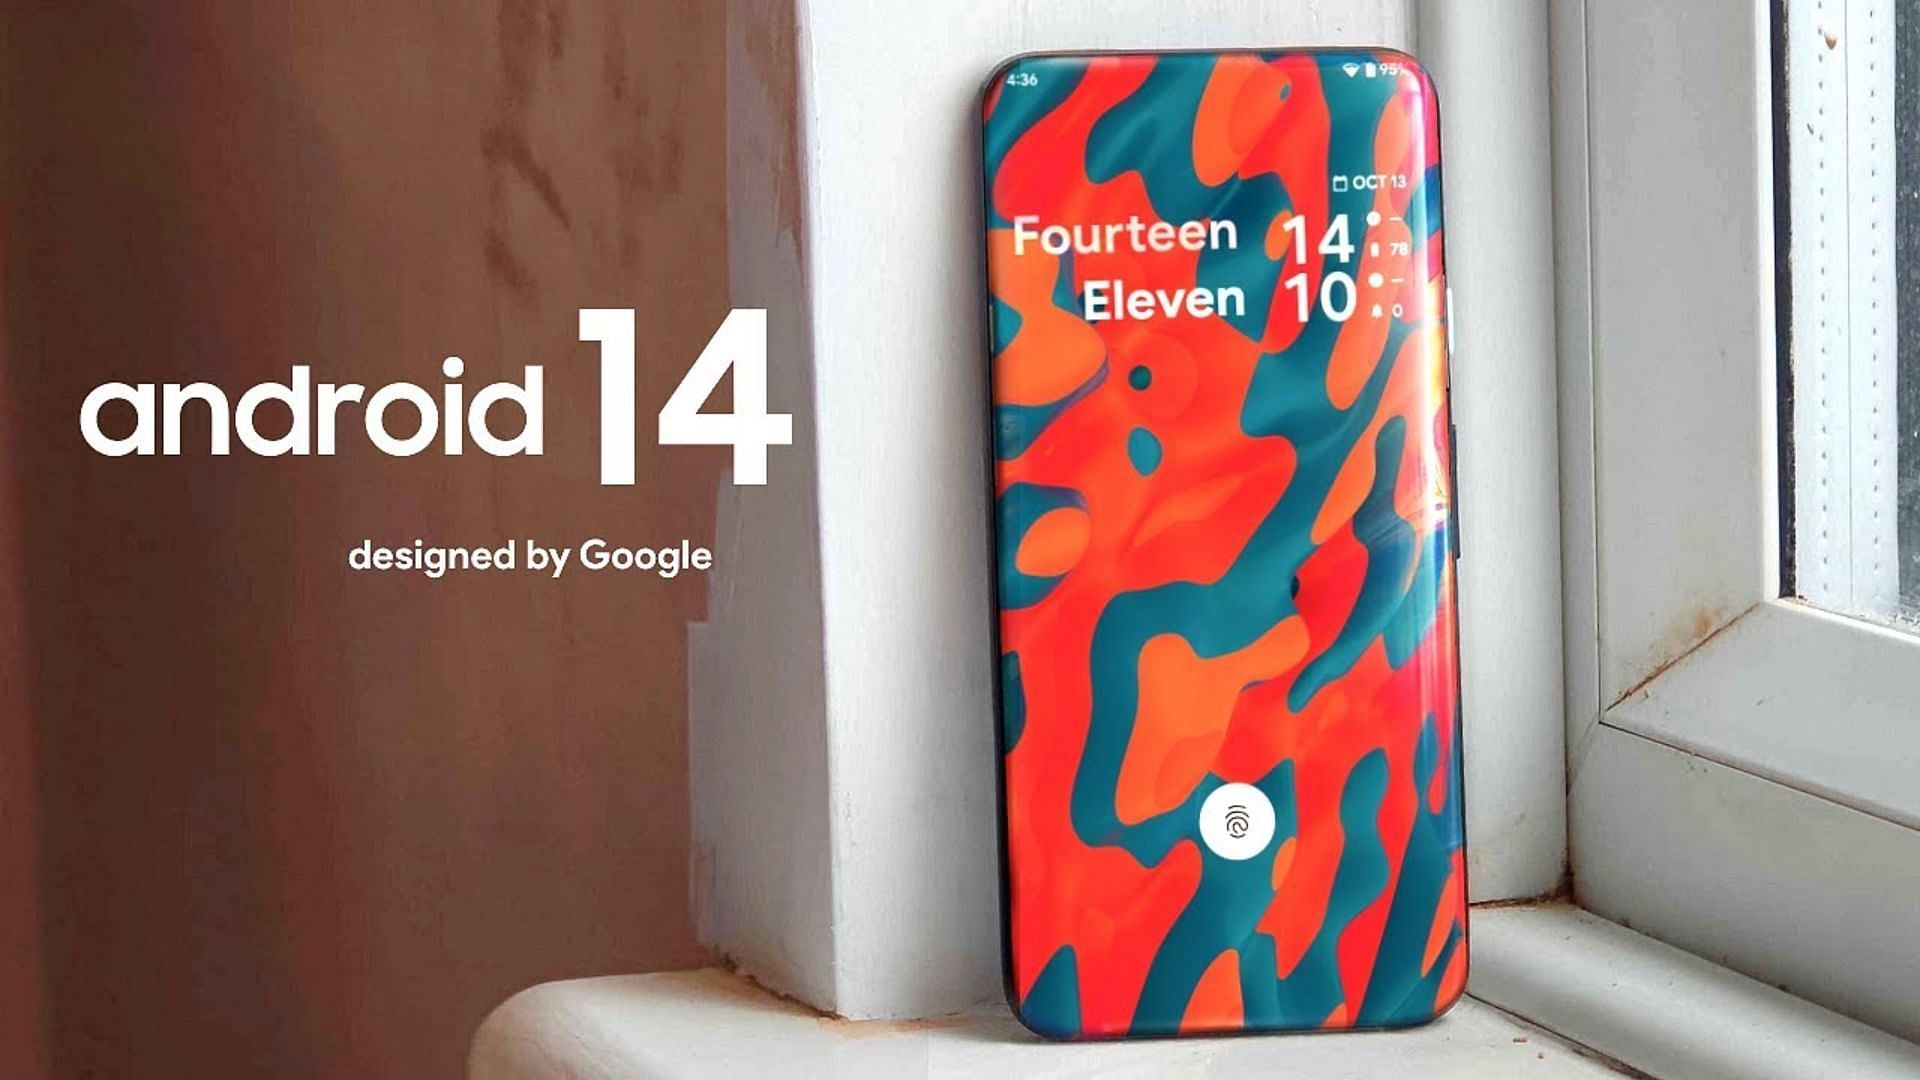 Android Q Dessert Name May Have Been Queen Cake, Says Dave Burke, VP Android  | Technology News